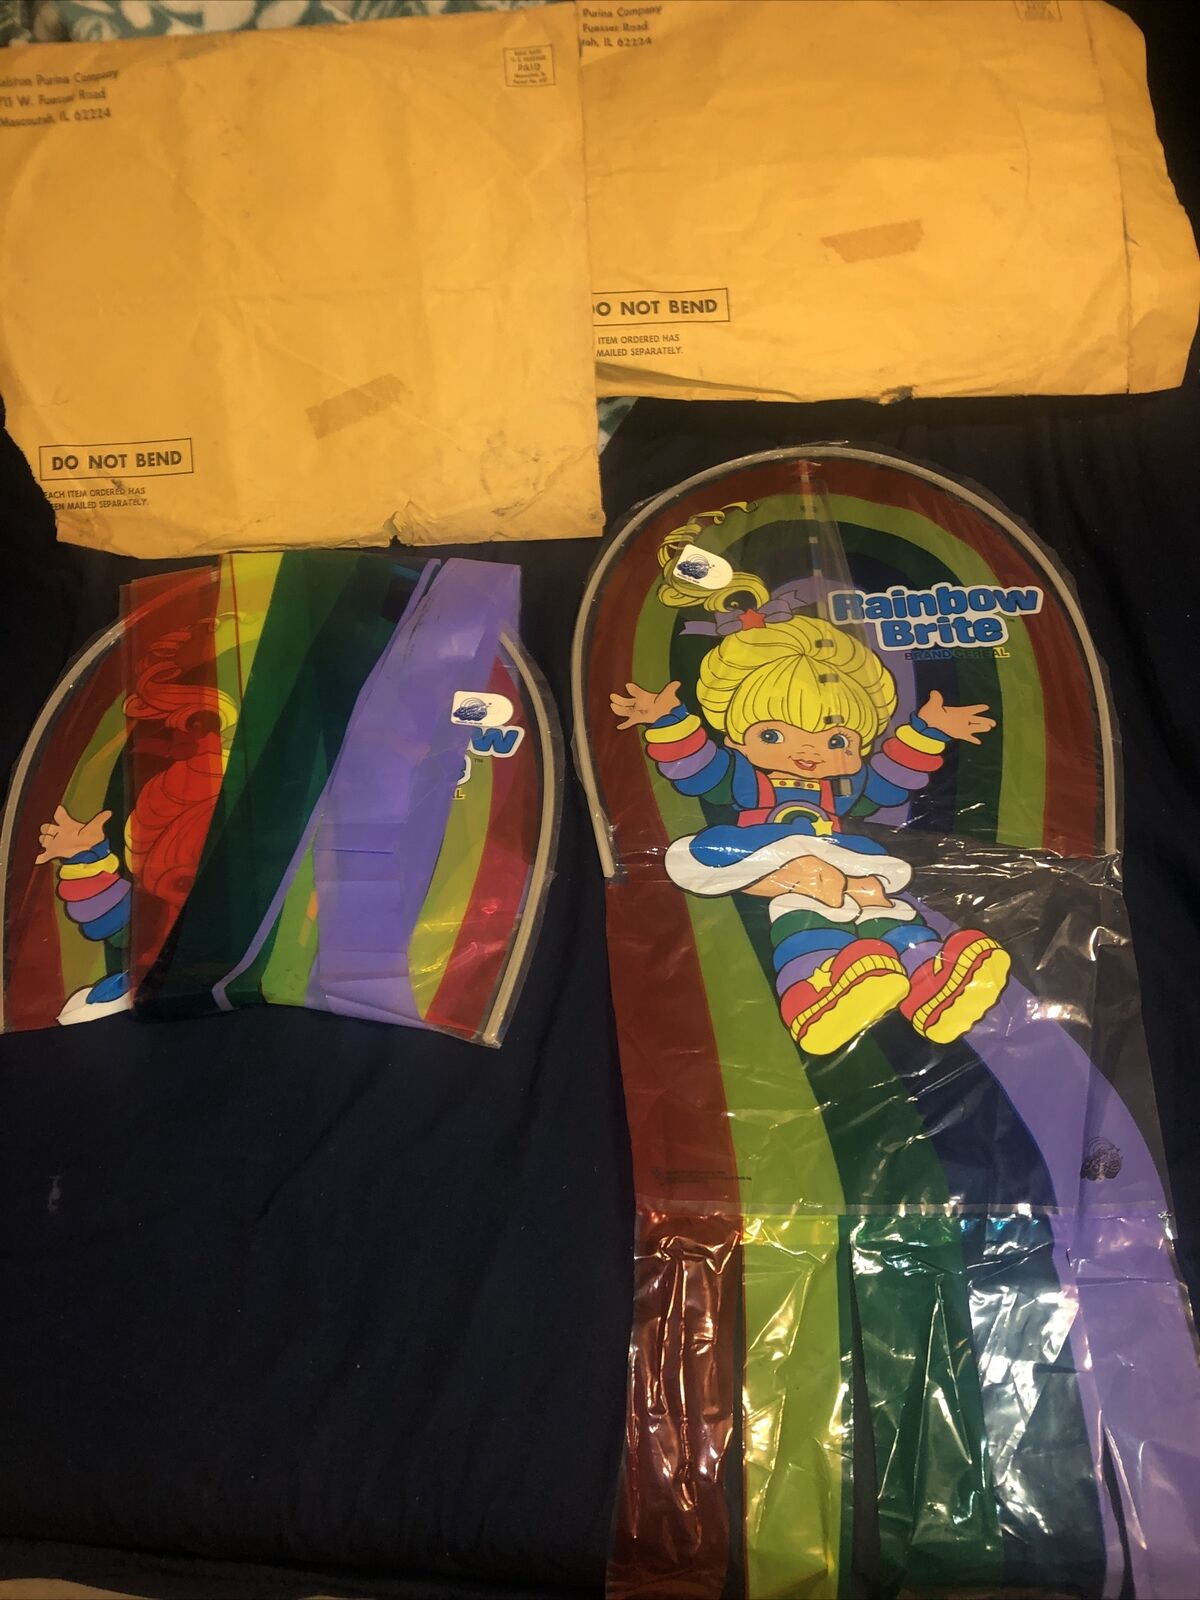 1984 VINTAGE RARE RAINBOW BRITE CEREAL BOX KITE PRIZE/TOY BY RALSTON IN ORG.PKG.